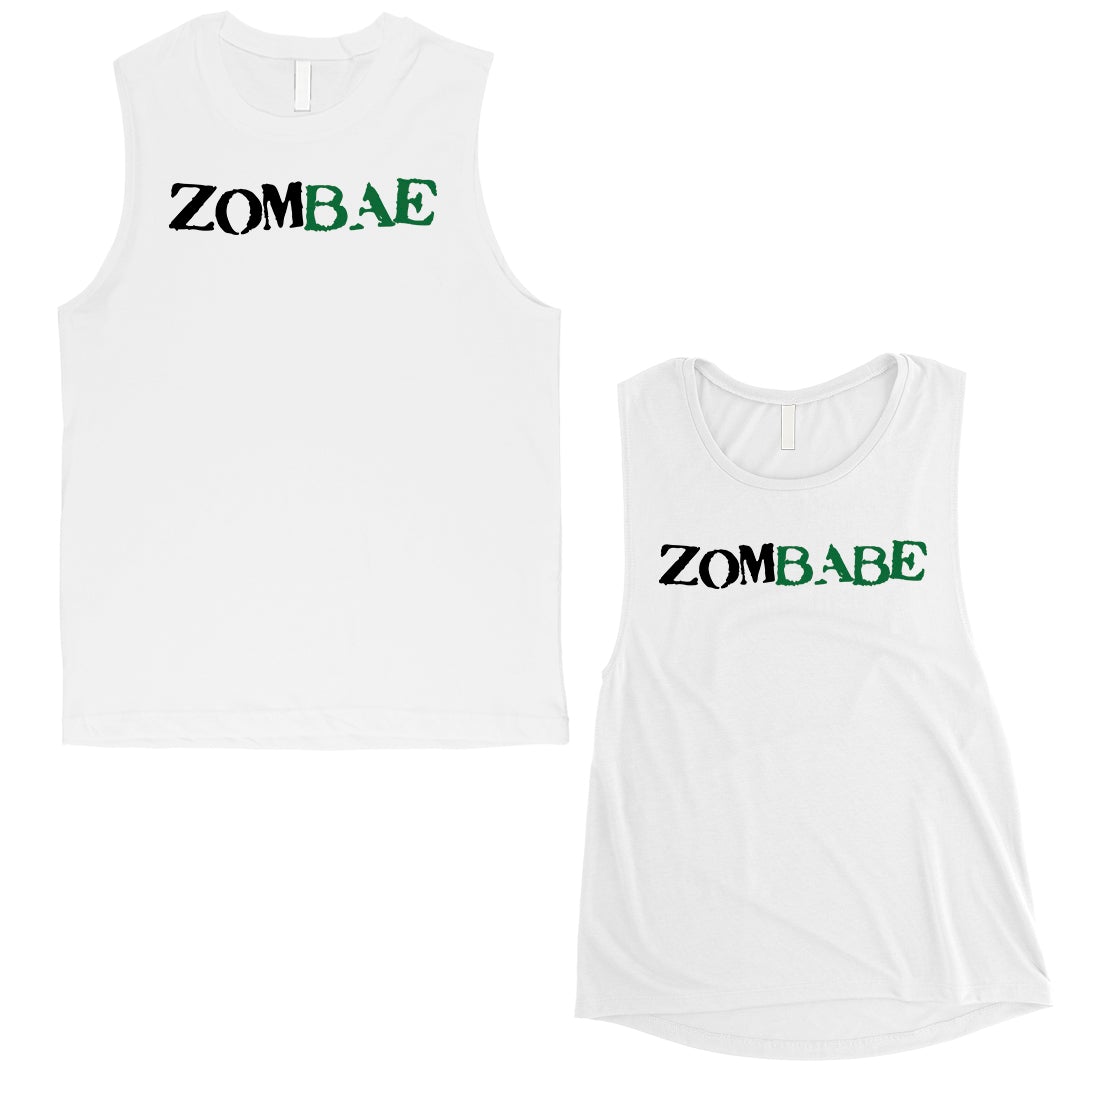 Zombae And Zombabe Couples Muscle Tank Tops White